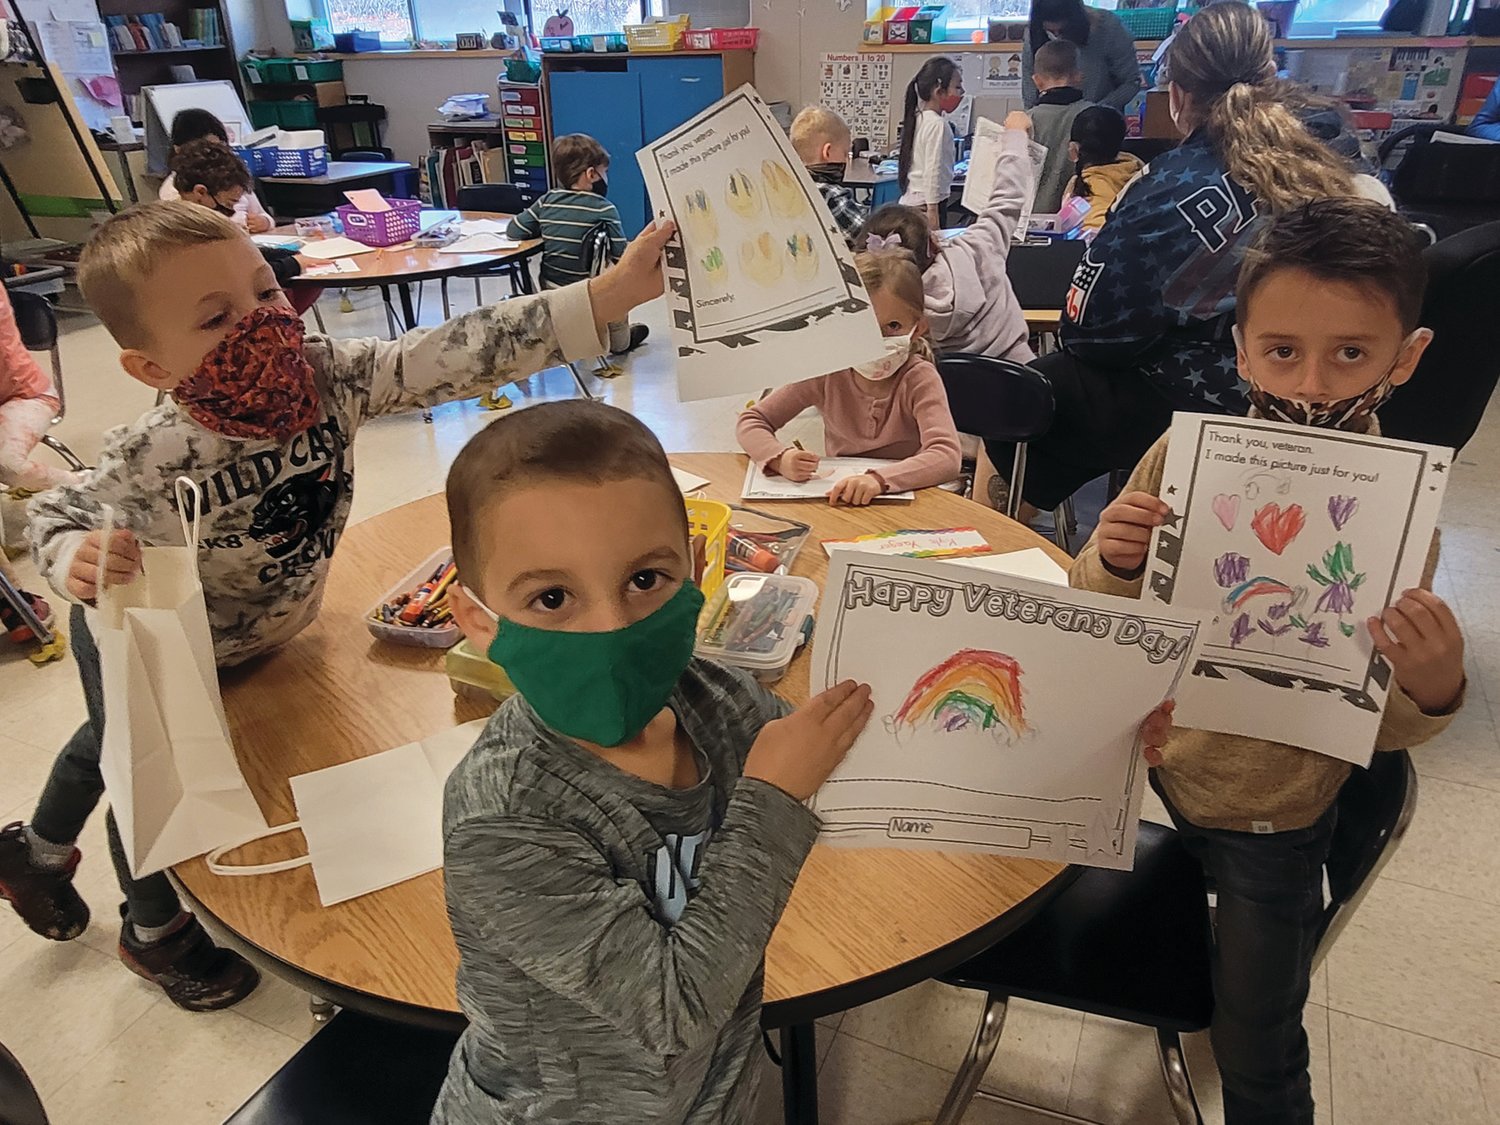 Barnes School students in Johnston first drew pictures for veterans, and then attached the drawings to bags they filled with snacks and toiletries.